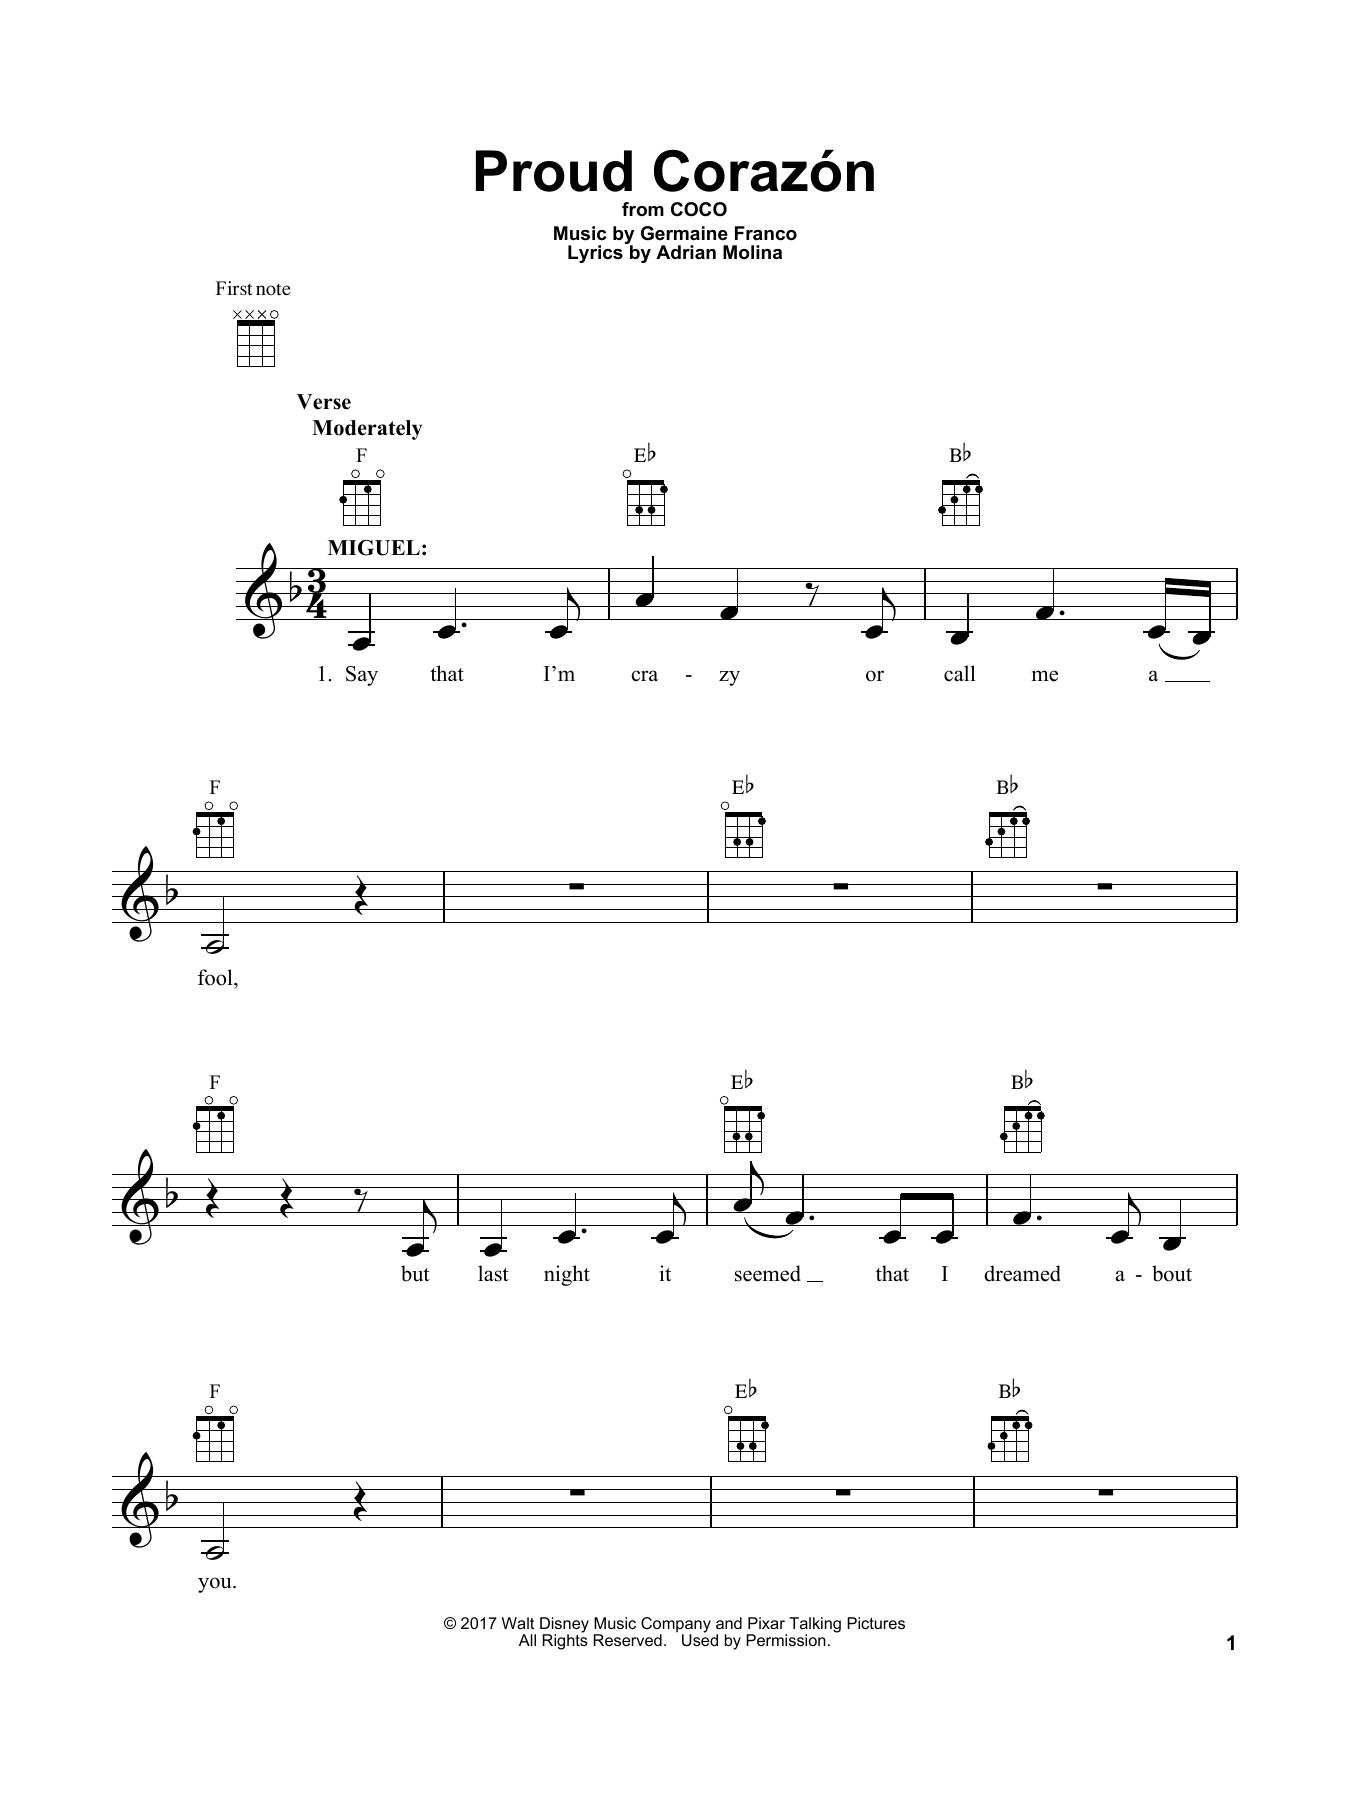 Germaine Franco & Adrian Molina Proud Corazon (from Coco) sheet music notes printable PDF score